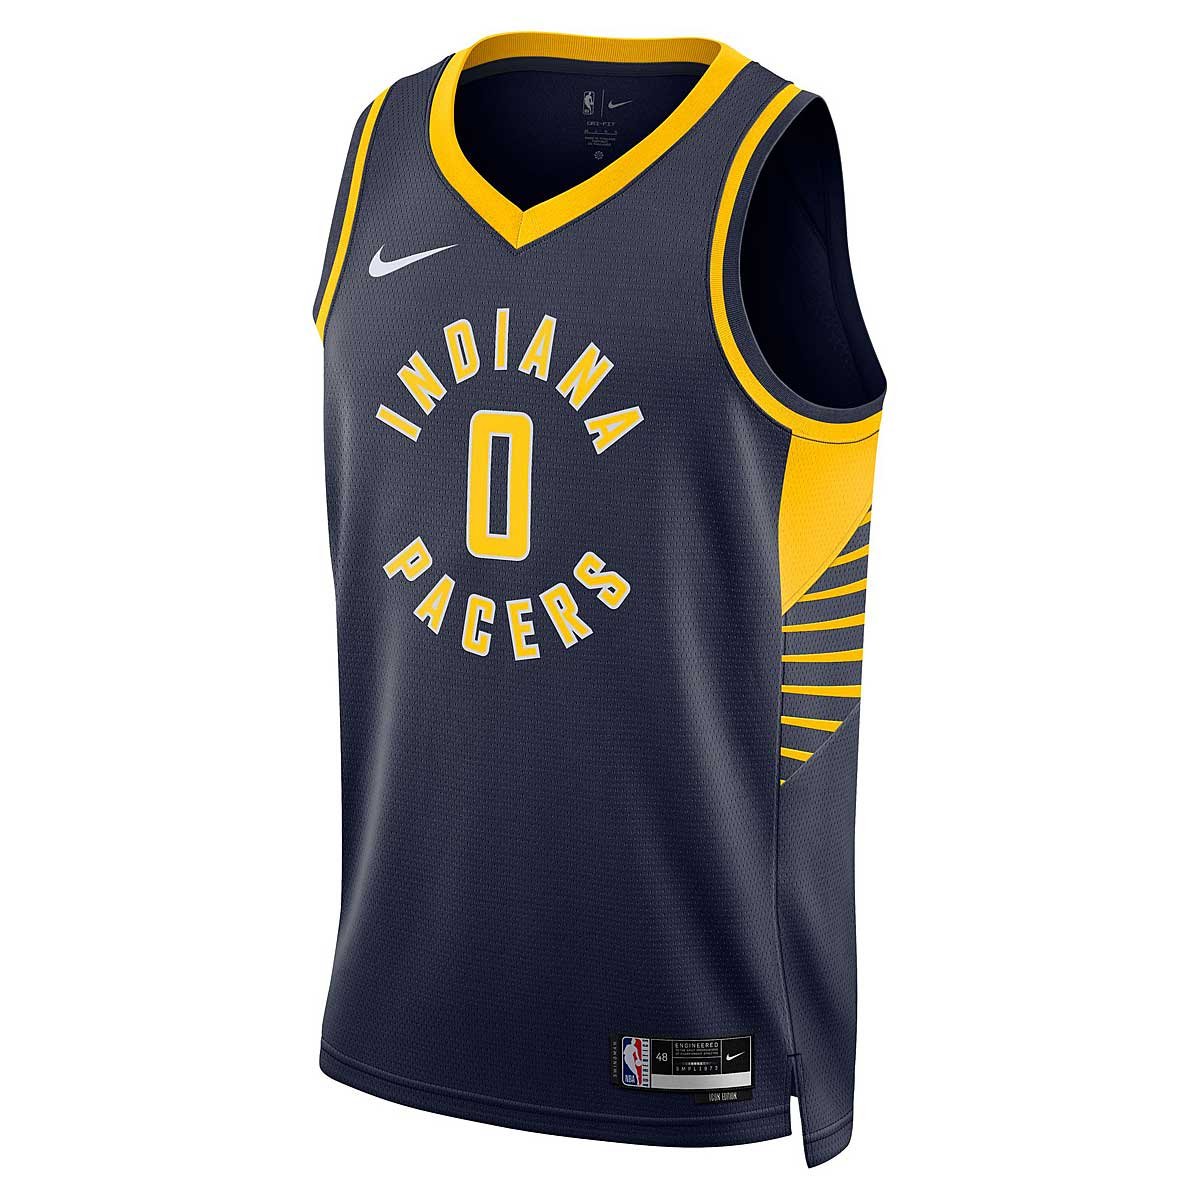 Jersey Nike Dri-FIT NBA Indiana Pacers Icon Edition 2022/23 Swingman Jersey  DN2007-424